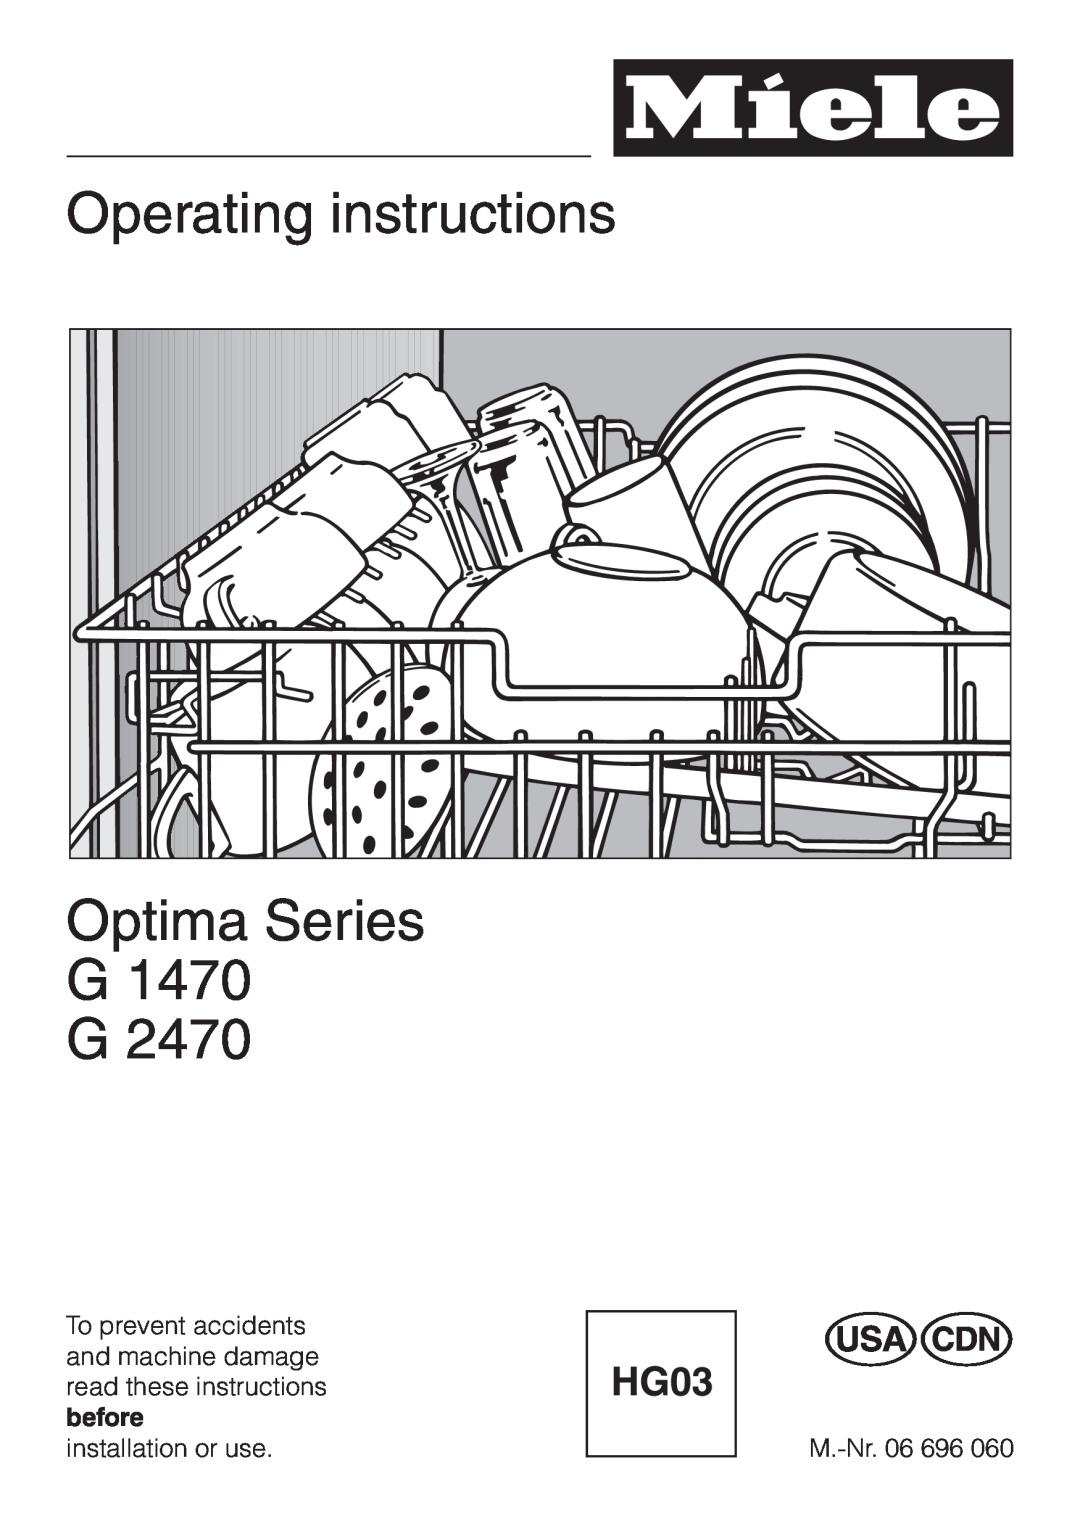 Miele operating instructions Operating instructions Optima Series G1470 G2470 